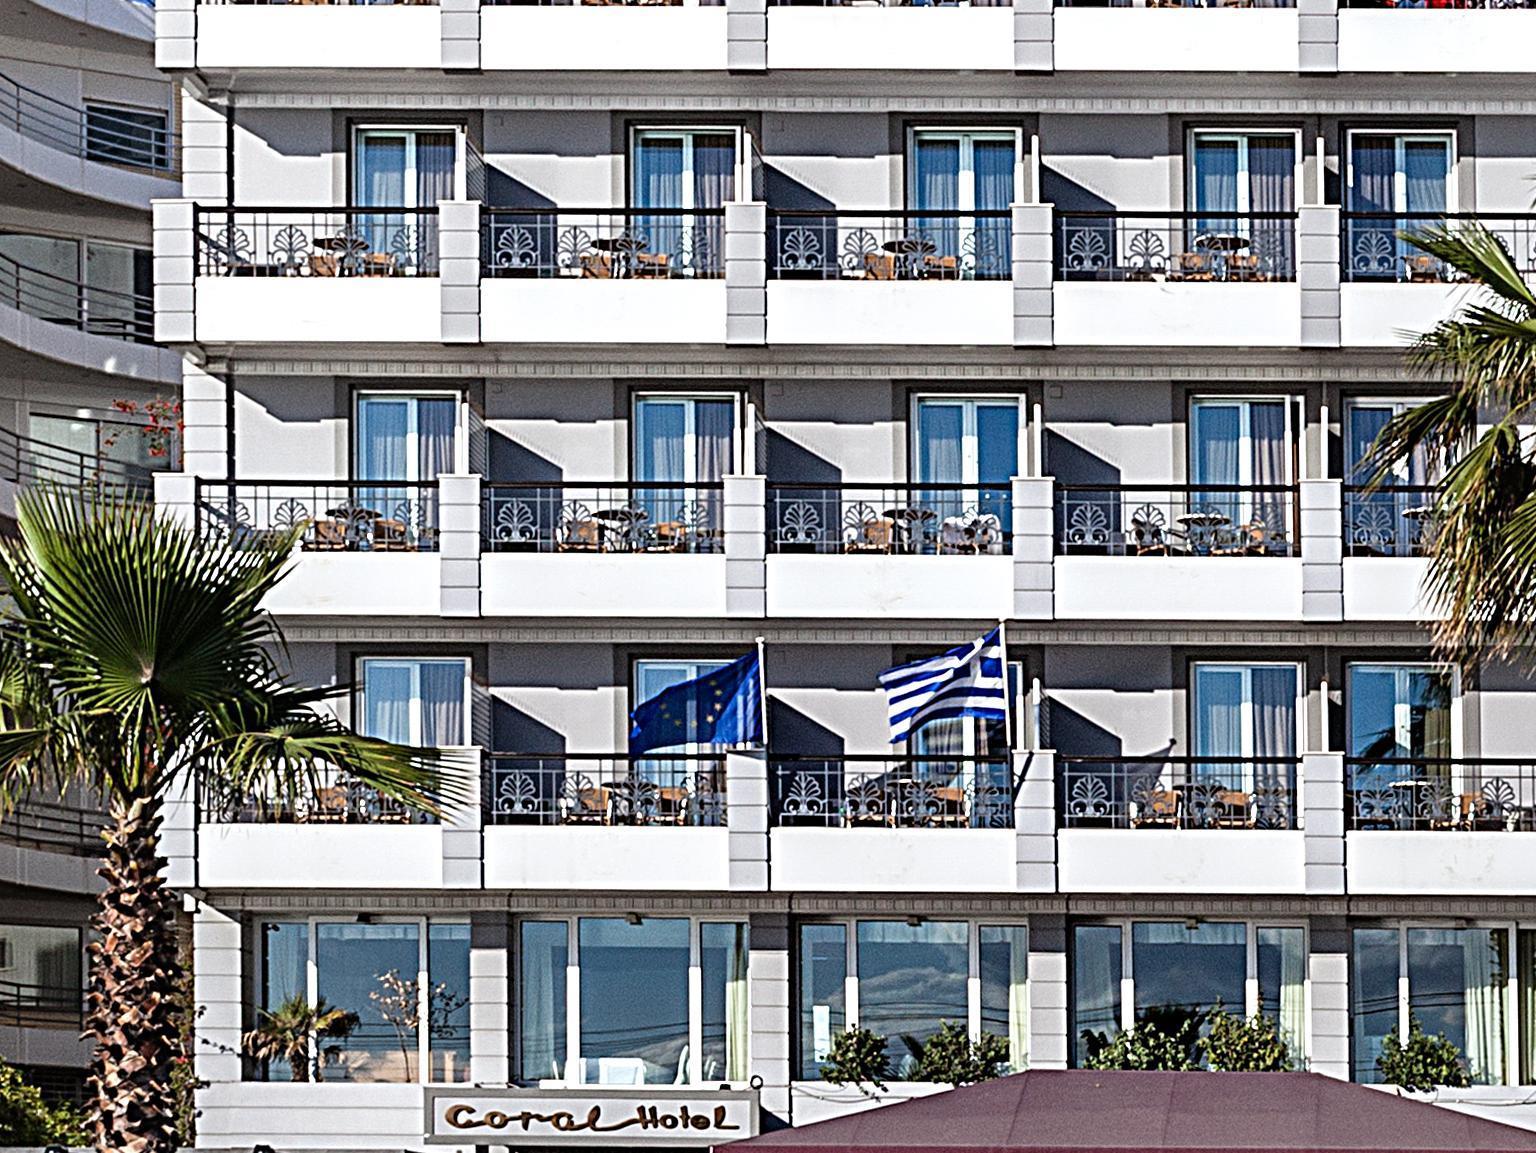 Coral Hotel Athens FAQ 2016, What facilities are there in Coral Hotel Athens 2016, What Languages Spoken are Supported in Coral Hotel Athens 2016, Which payment cards are accepted in Coral Hotel Athens , Athens Coral Hotel room facilities and services Q&A 2016, Athens Coral Hotel online booking services 2016, Athens Coral Hotel address 2016, Athens Coral Hotel telephone number 2016,Athens Coral Hotel map 2016, Athens Coral Hotel traffic guide 2016, how to go Athens Coral Hotel, Athens Coral Hotel booking online 2016, Athens Coral Hotel room types 2016.